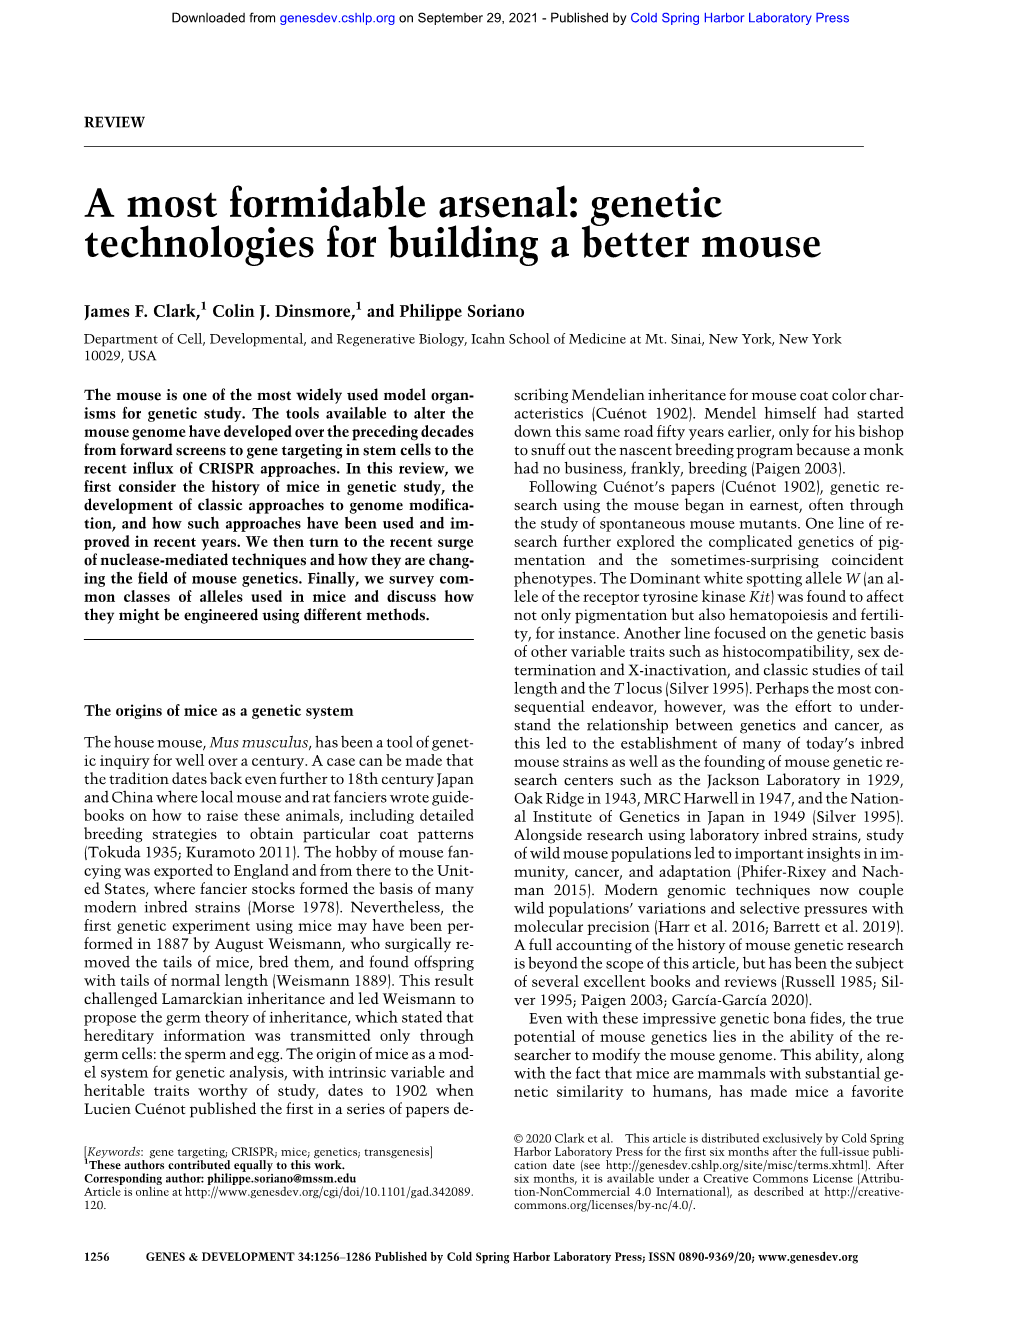 Genetic Technologies for Building a Better Mouse